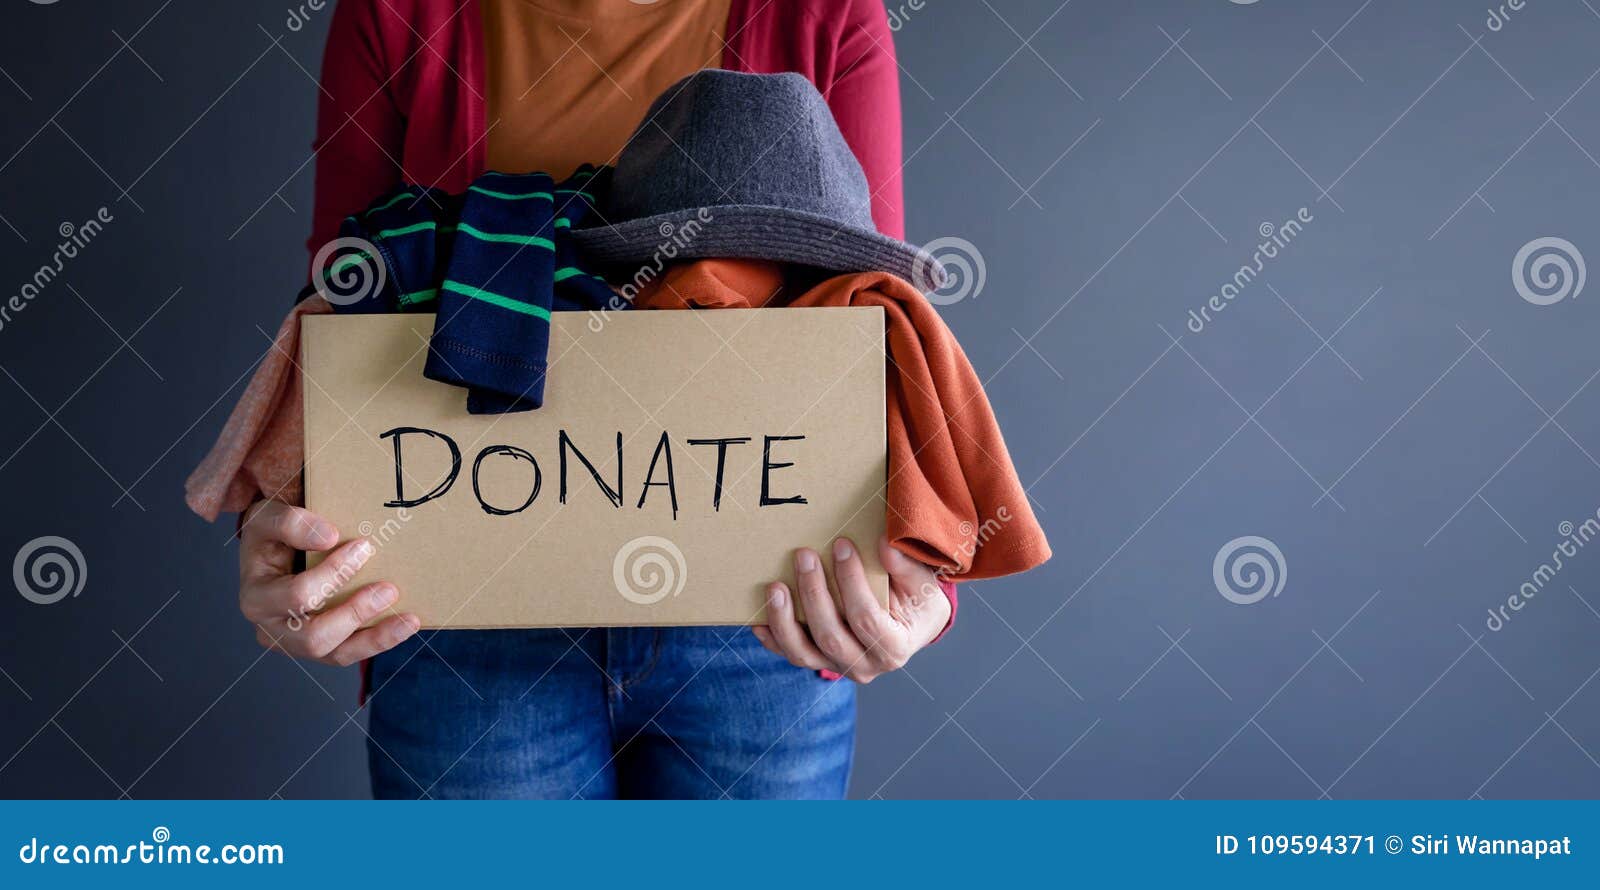 donation concept. woman holding a donate box with full of clothe